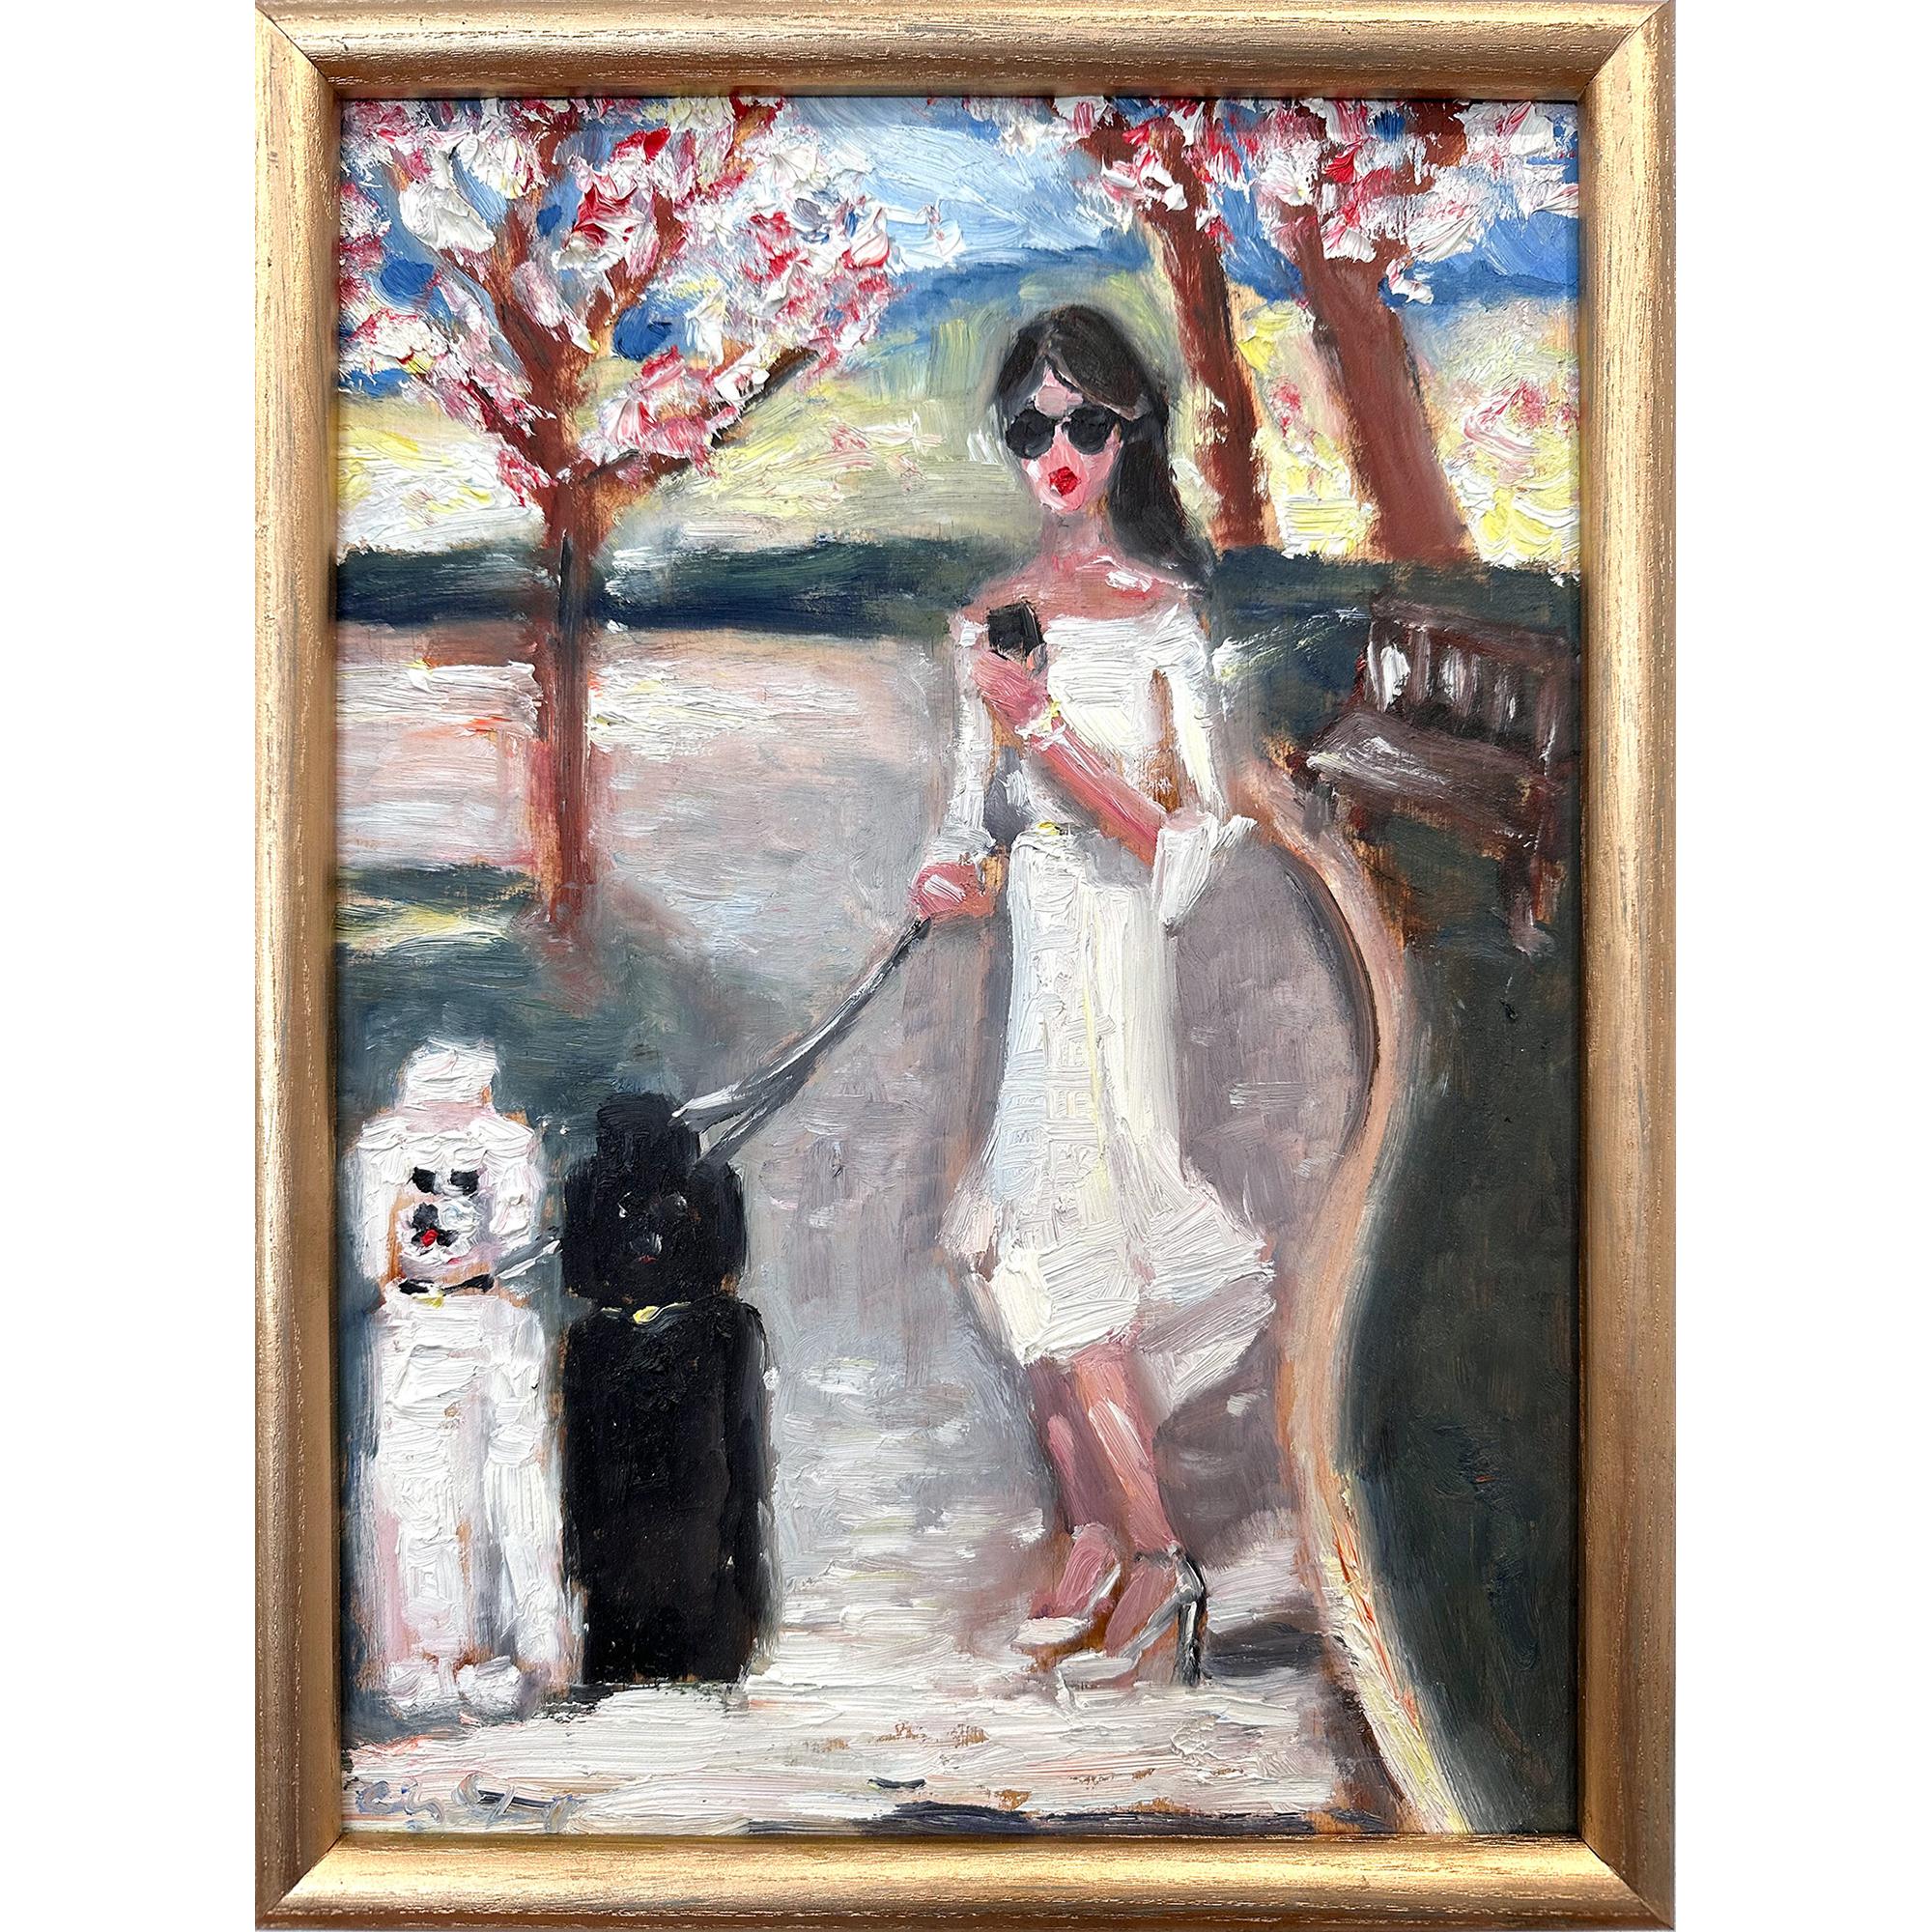 Cindy Shaoul Landscape Painting - "Stepping Out At the Park" Plein Air Oil Painting in NYC Central Park w Poodles